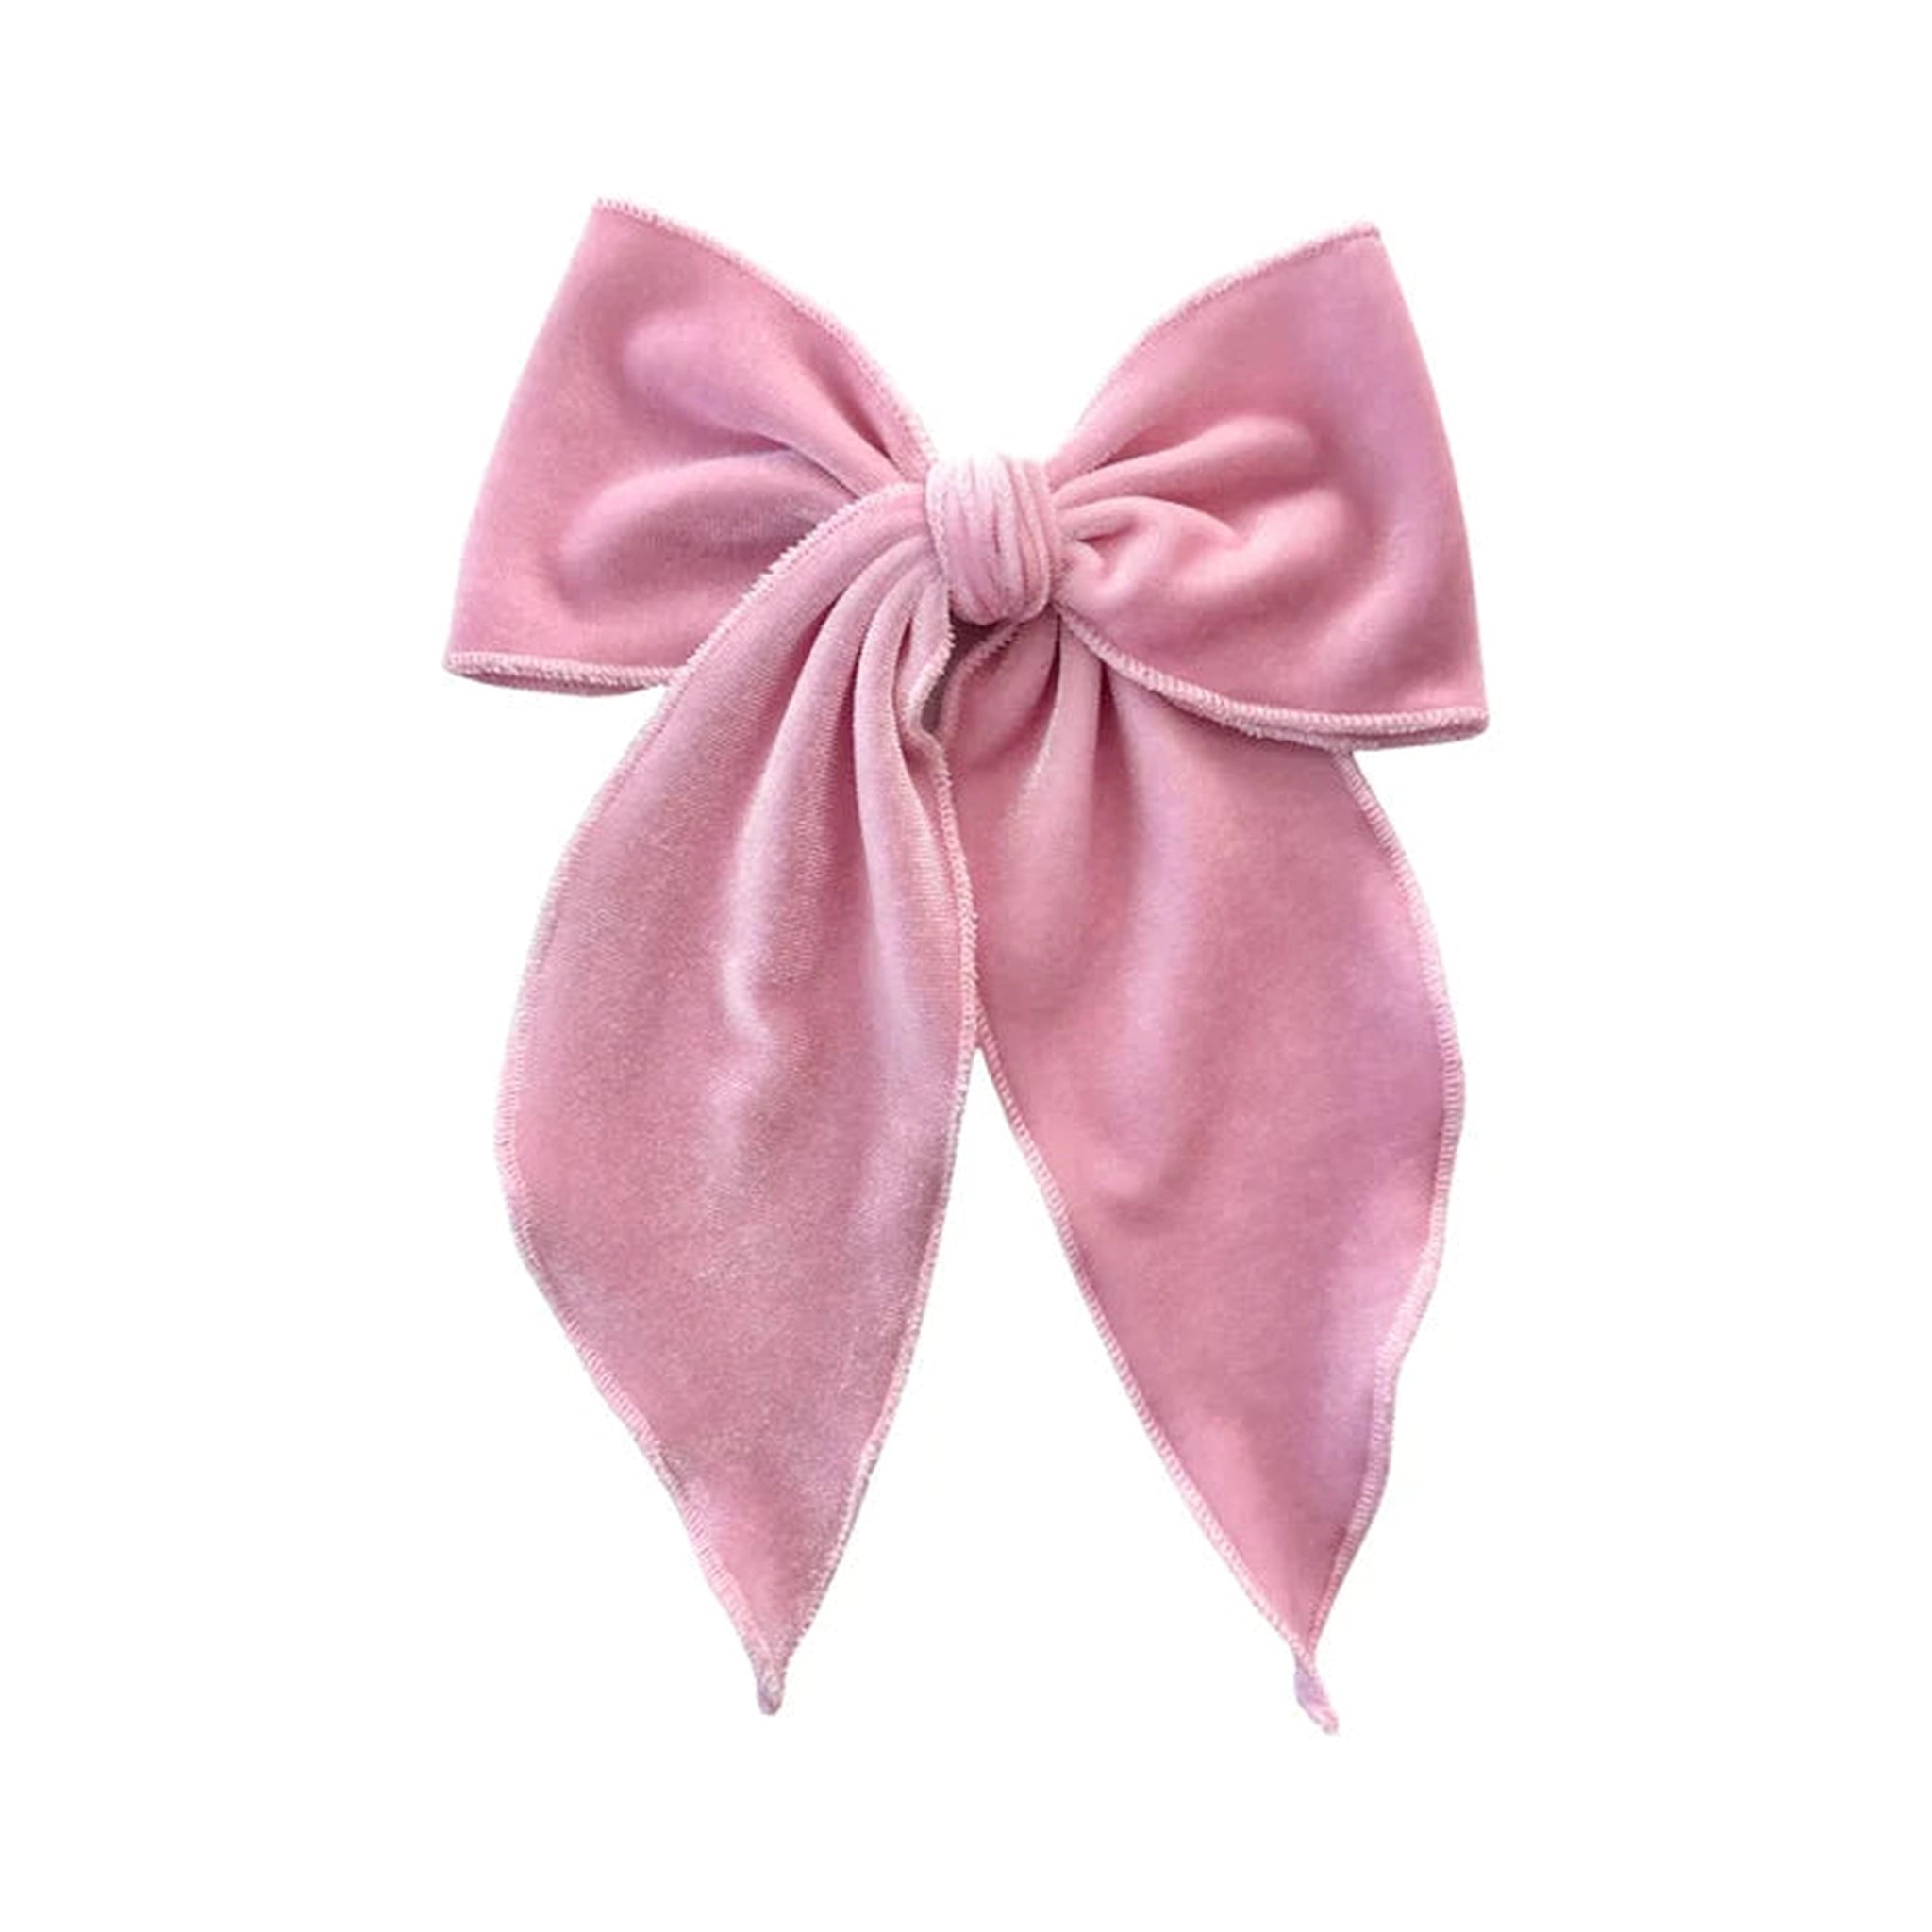 Velvet Fay Large Bow - Several Colors